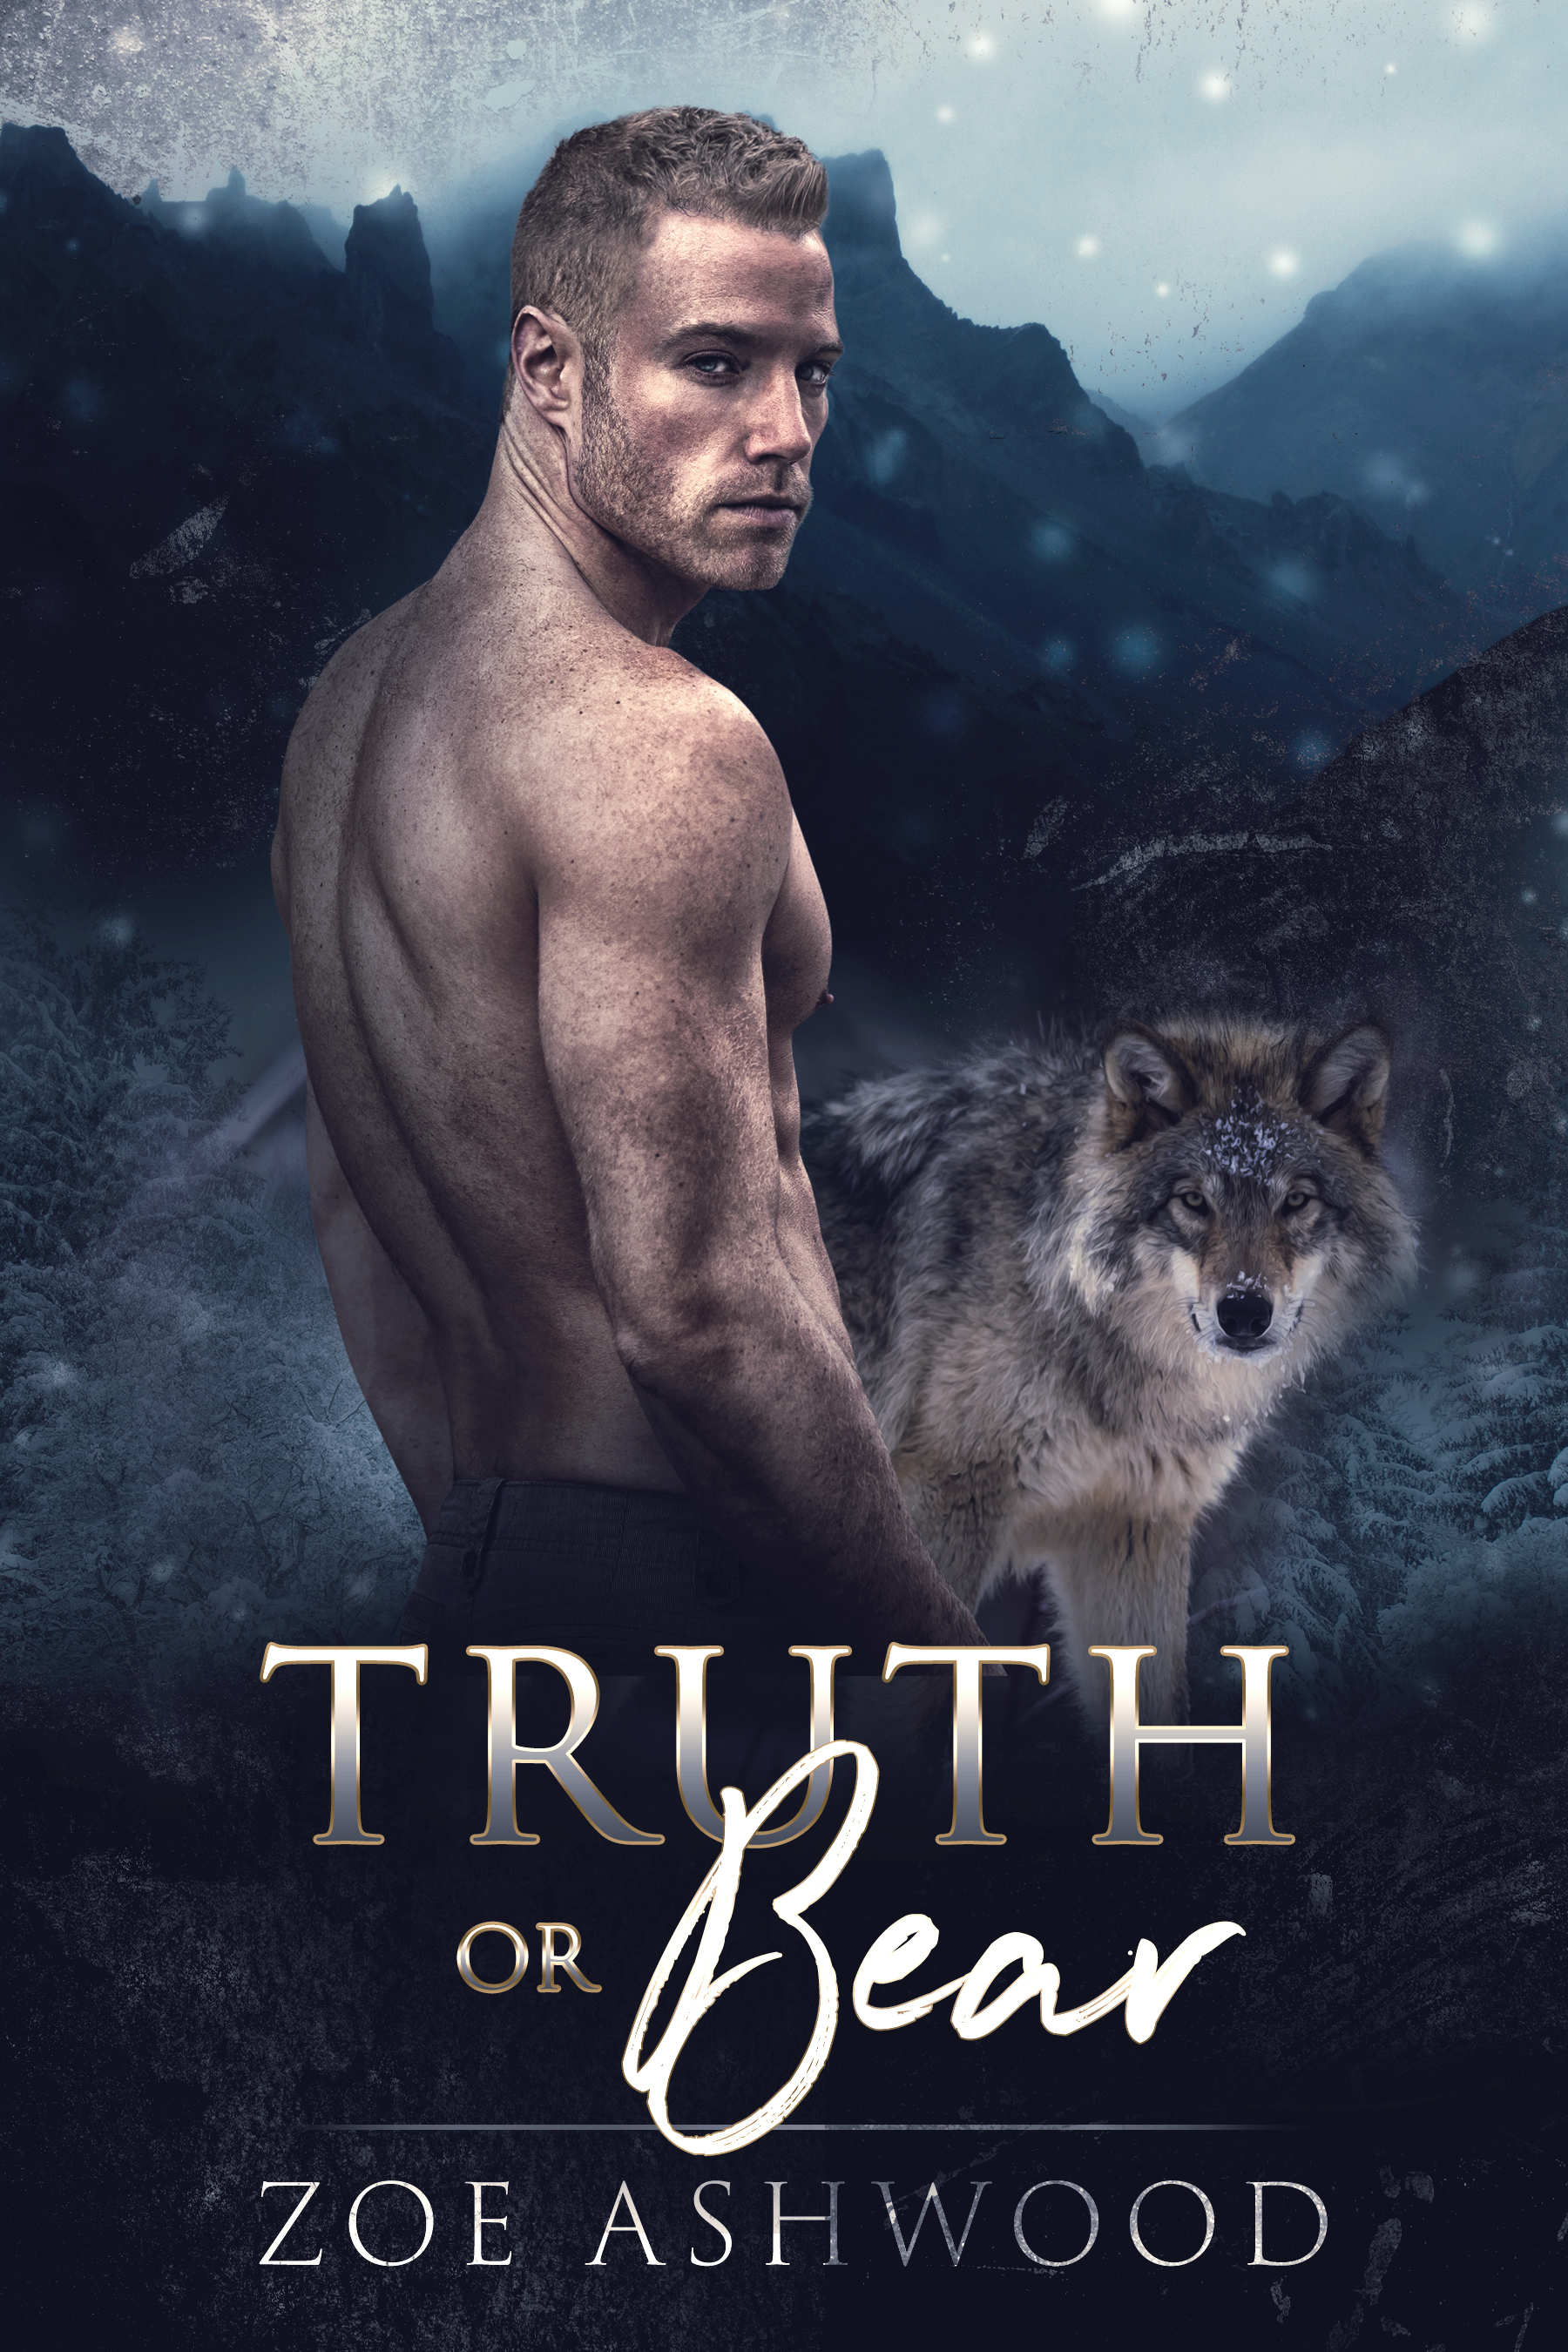 Truth or Bear by Zoe Ashwood - a enemies-to-lovers, second chance shapeshifter paranormal romance.